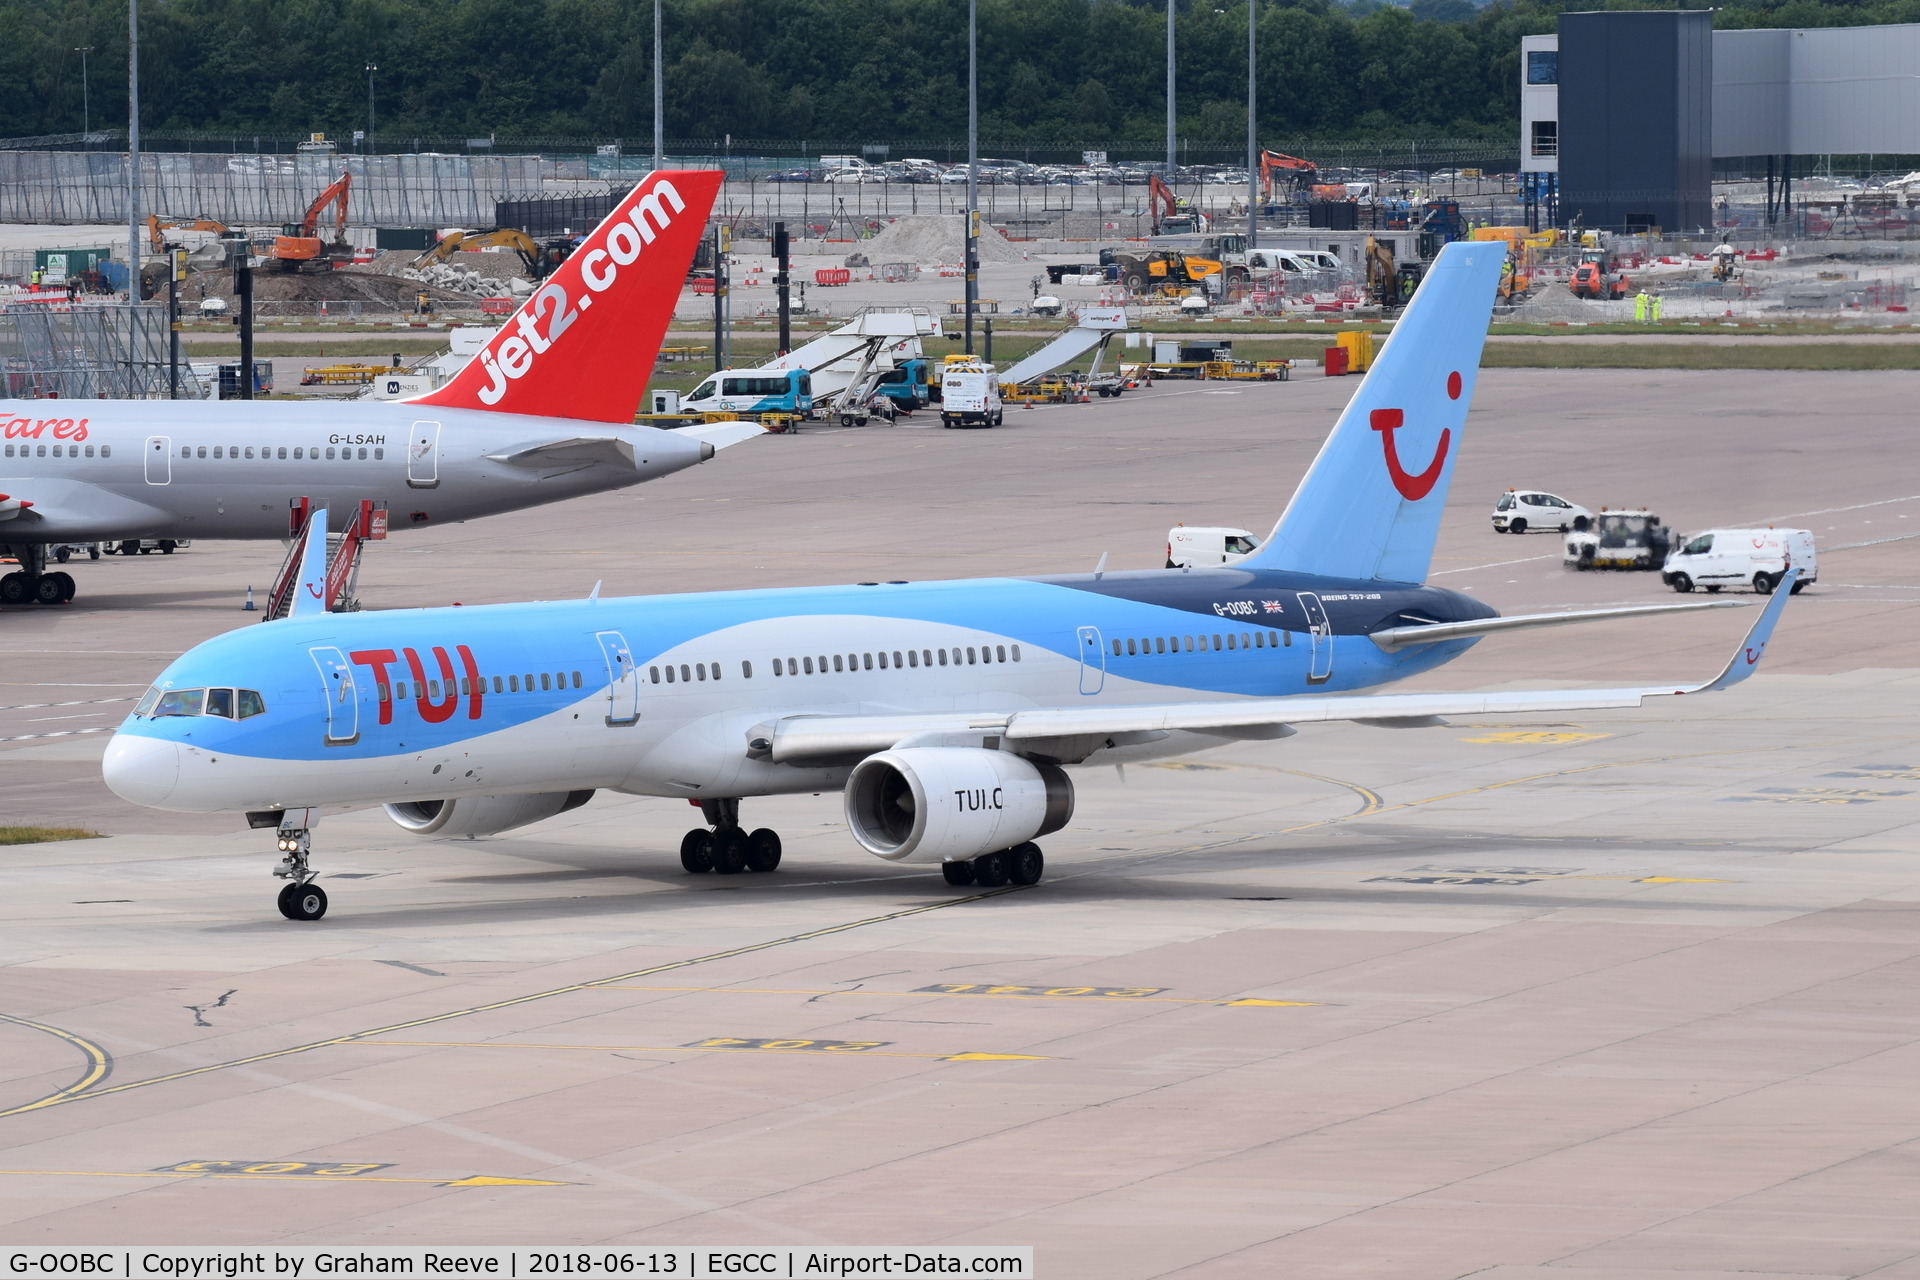 G-OOBC, 2003 Boeing 757-28A C/N 33098, In TUI livery at Manchester.